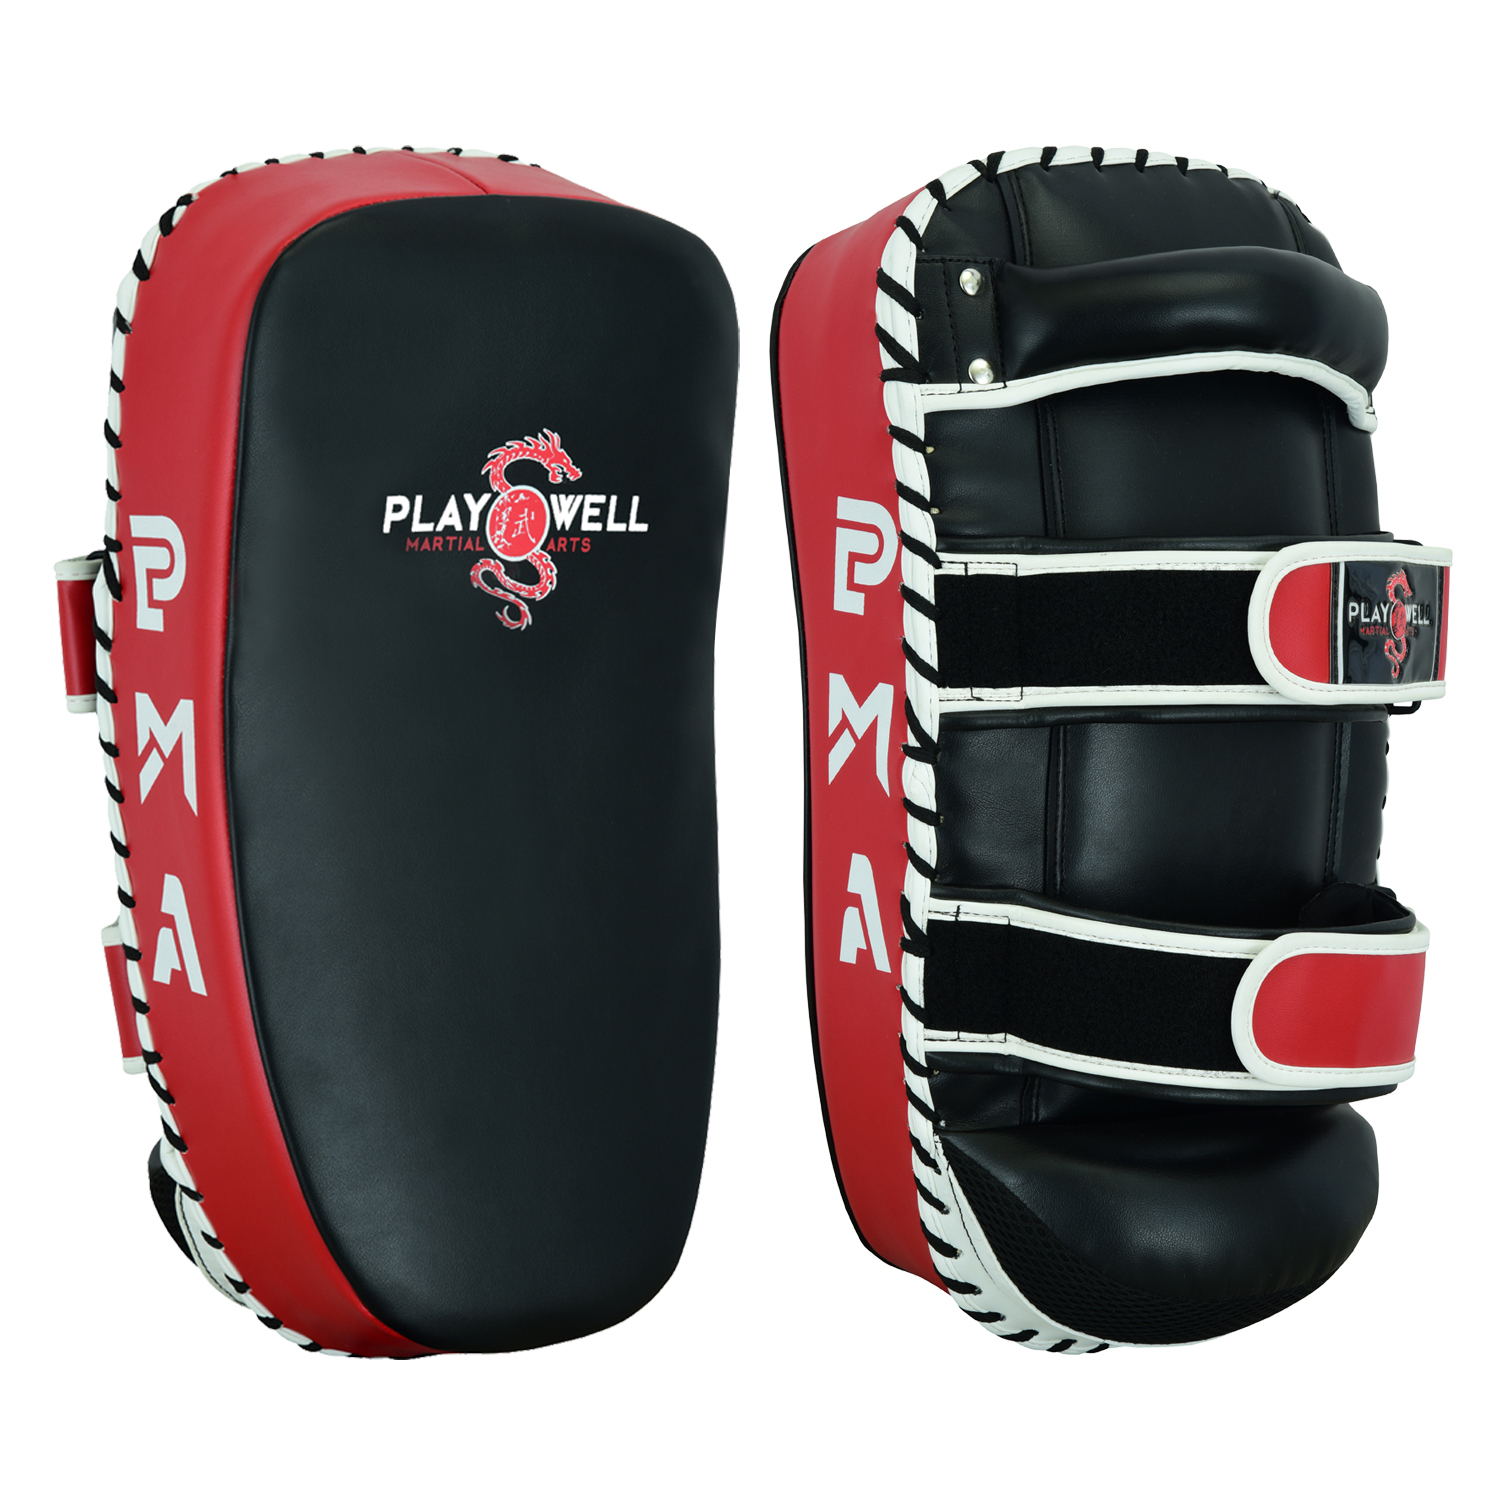 Deluxe Curved Thai Arm Pad W/ Shock Pads Black/Red: SINGLE - Click Image to Close